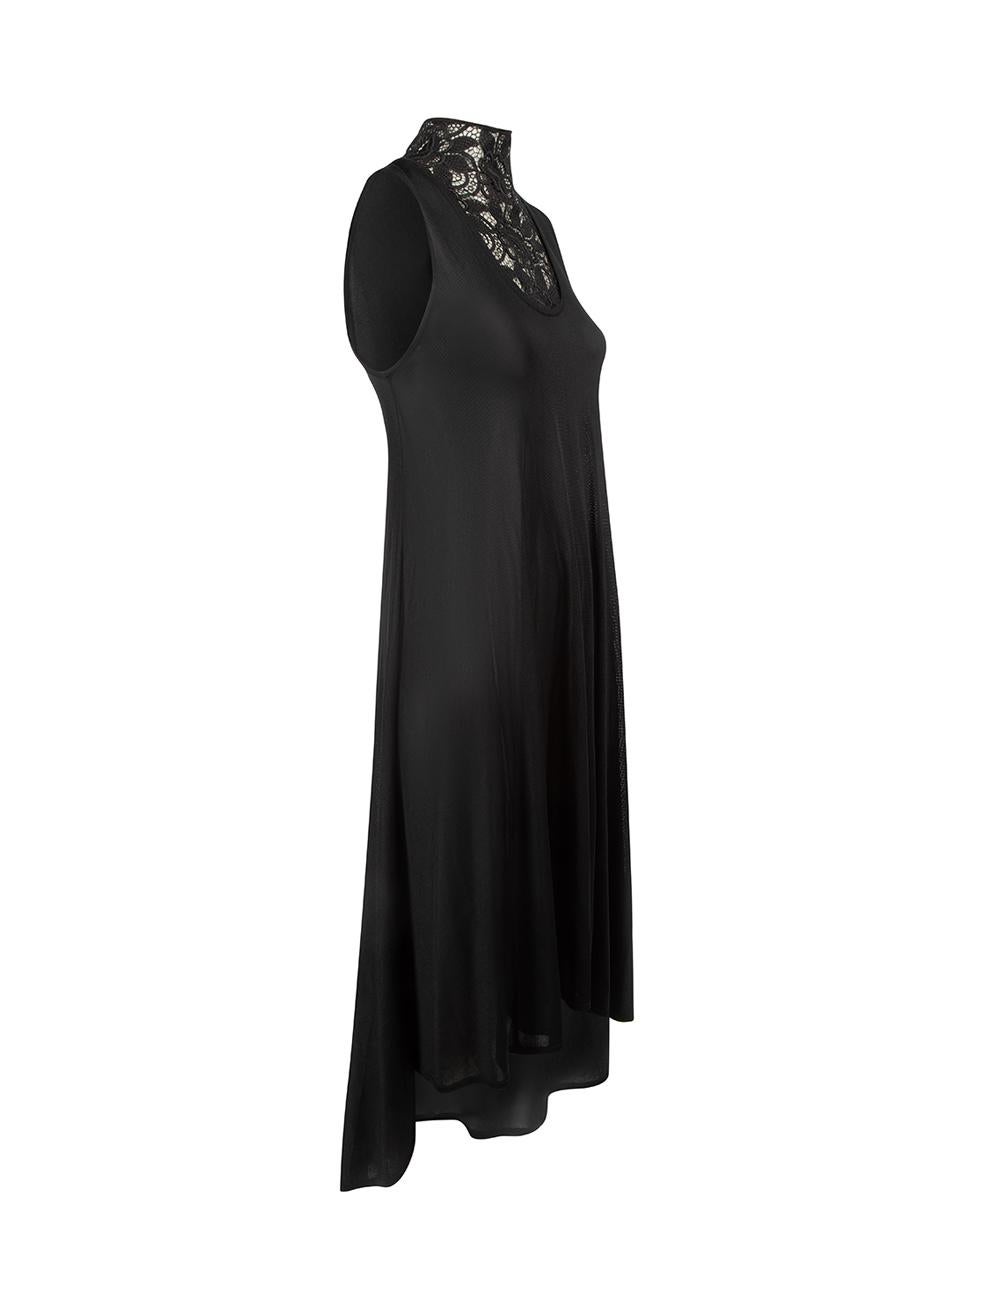 CONDITION is Never Worn. No visible wear to dress is evident on this used Alexander McQueen designer resale item. 



Details


Black

Viscose

See-through

Sleeveless maxi dress

High neckline

Lace panel detail on the front

Button fastening on